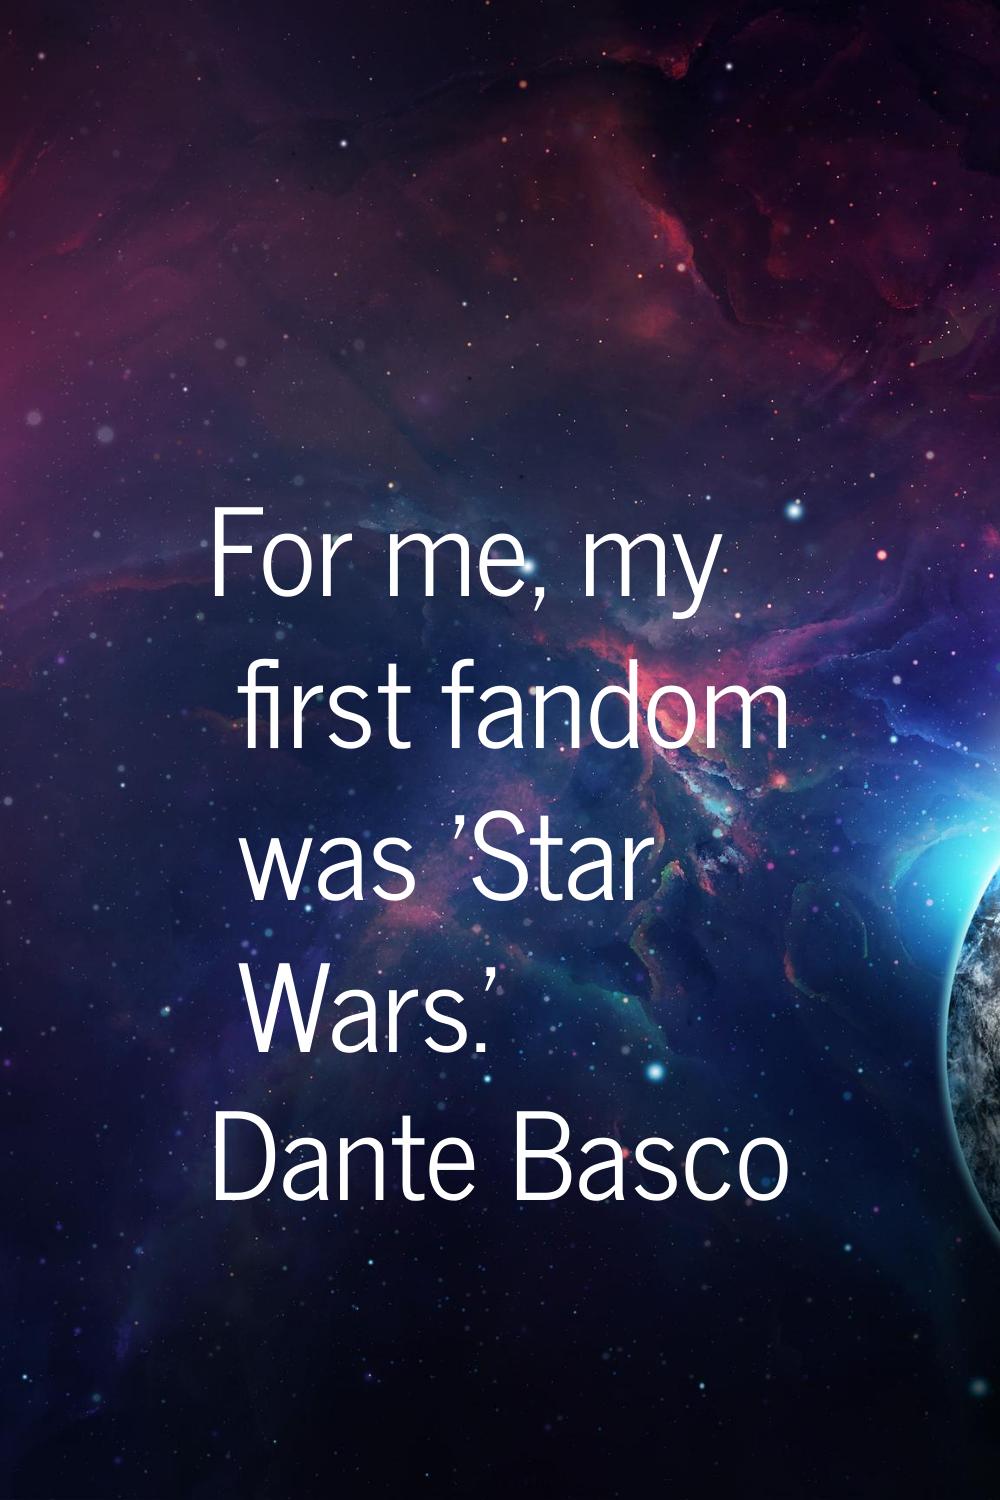 For me, my first fandom was 'Star Wars.'